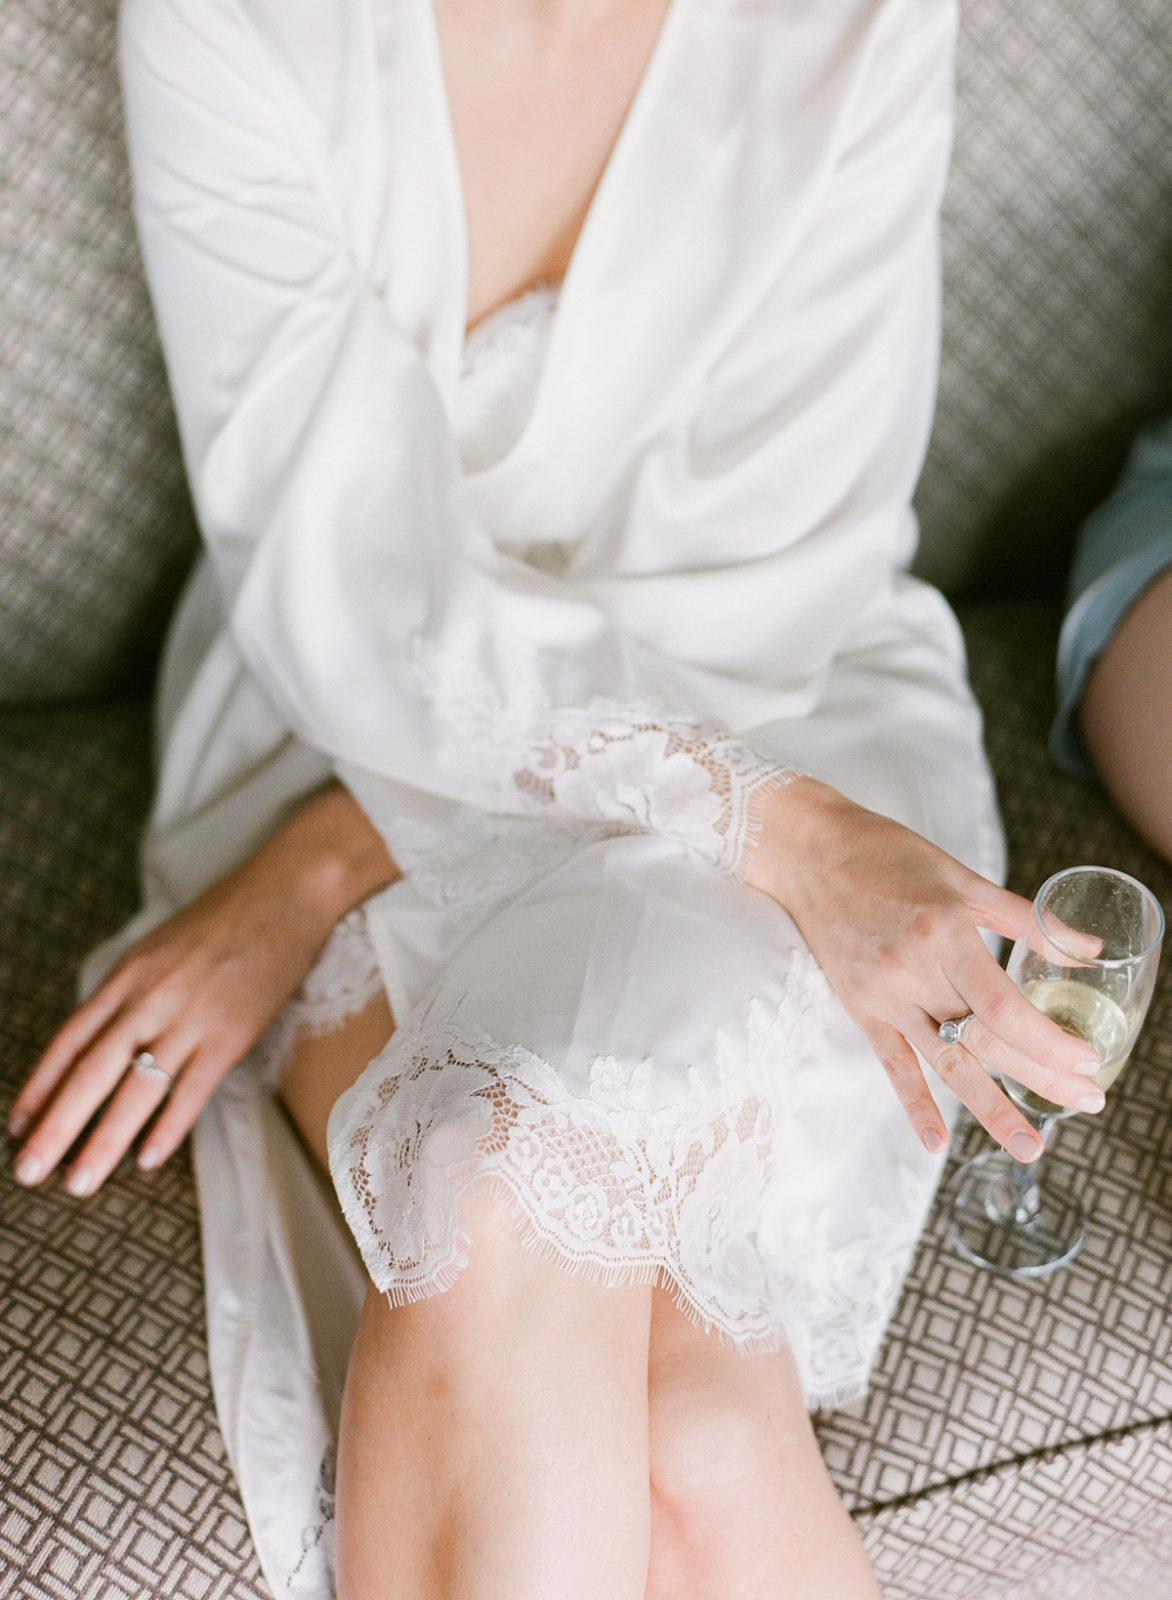 Ireland Film Photographer | Molly Carr Photography | Bride in Silk Robe Sipping Champagne Getting Ready